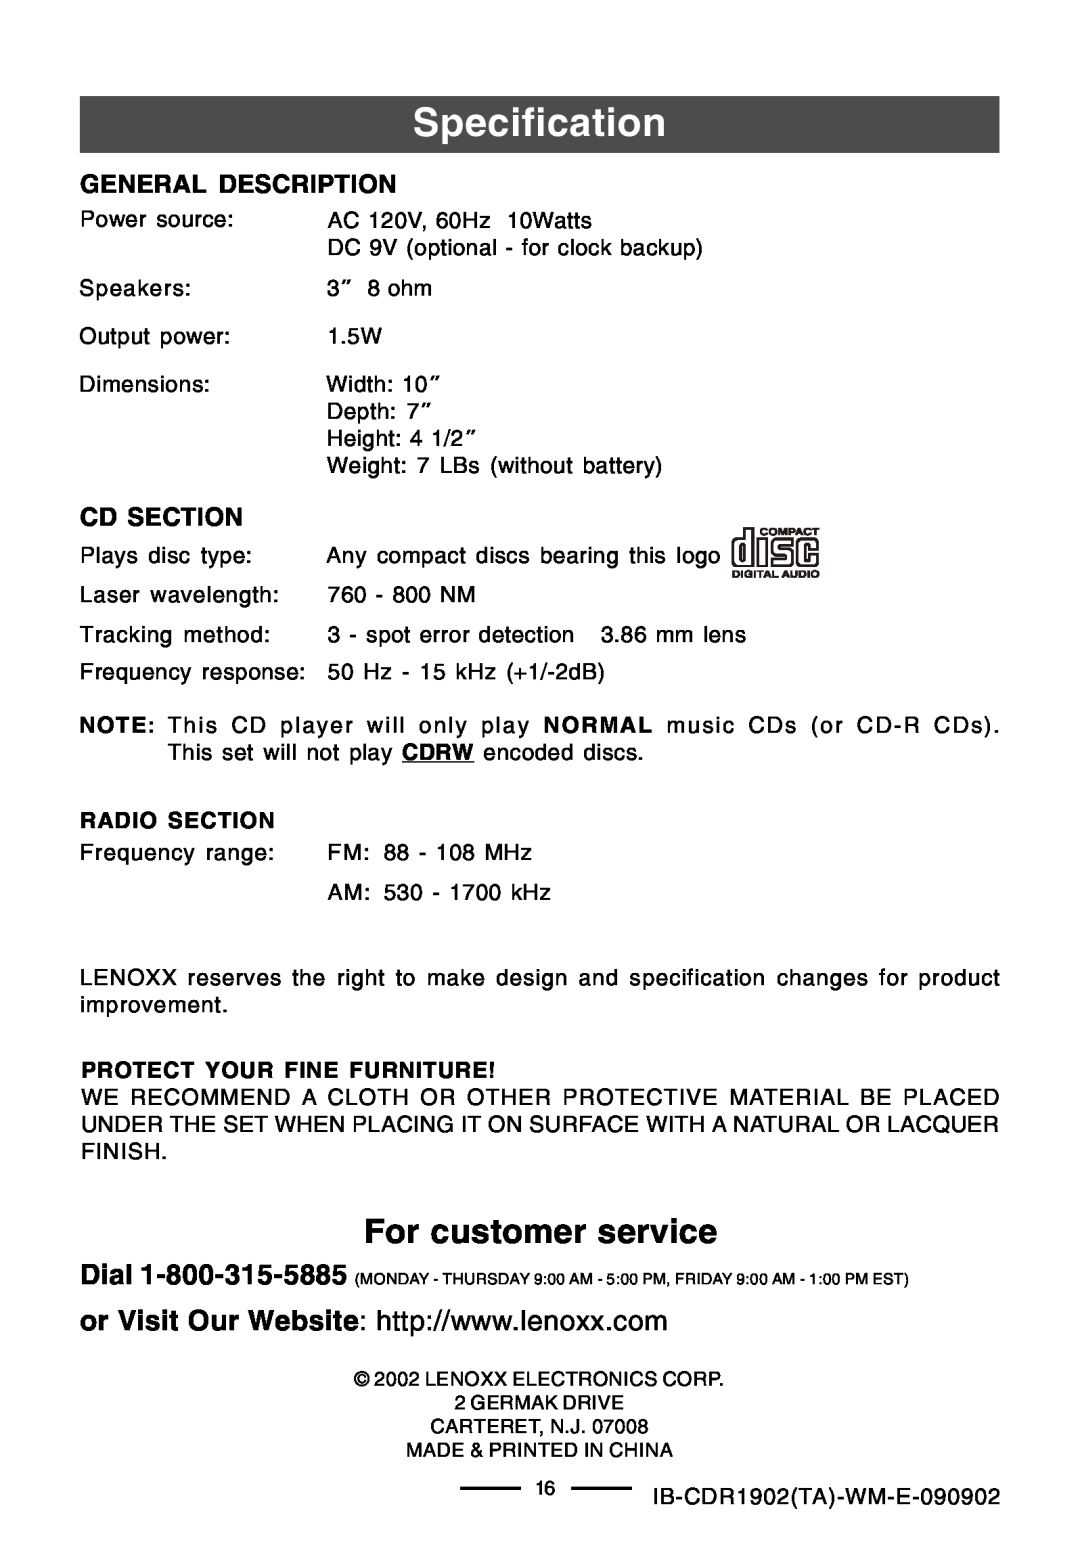 Lenoxx Electronics CDR-1902 operating instructions Specification, For customer service, General Description, Cd Section 